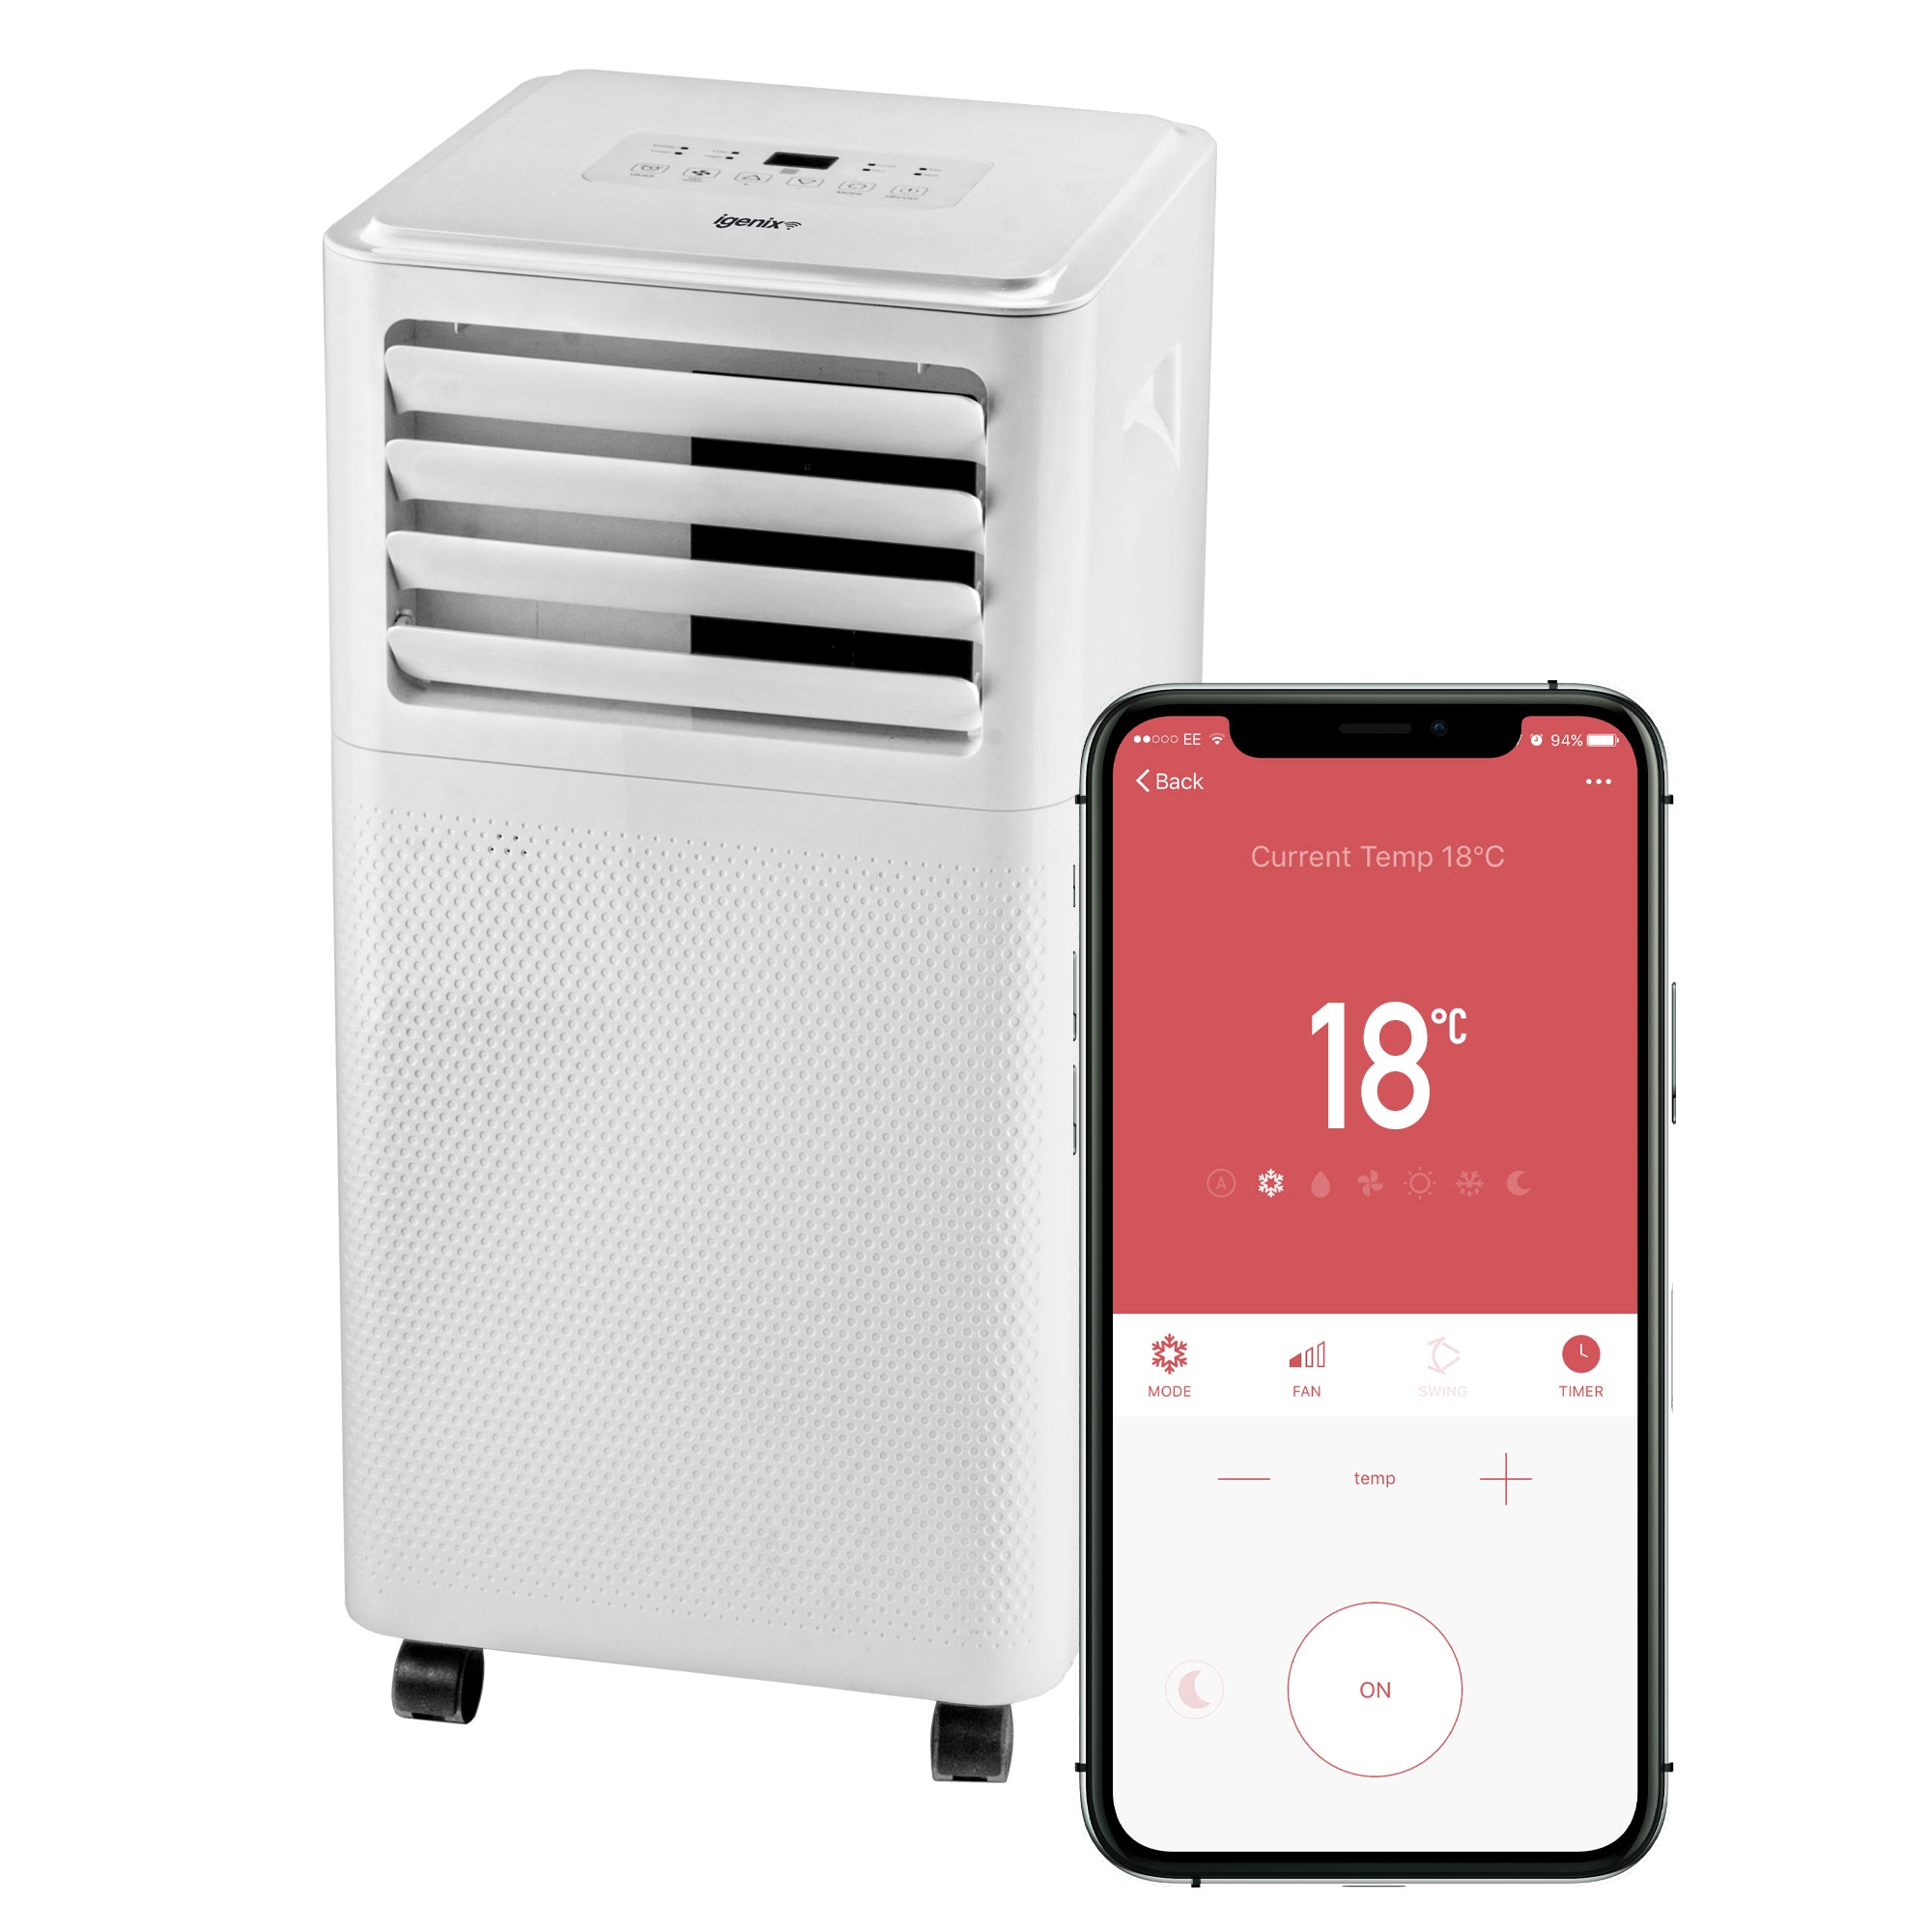 3-in-1 Smart Air Conditioner, Cooling, Fan & Dehumidifier, 9000 BTU